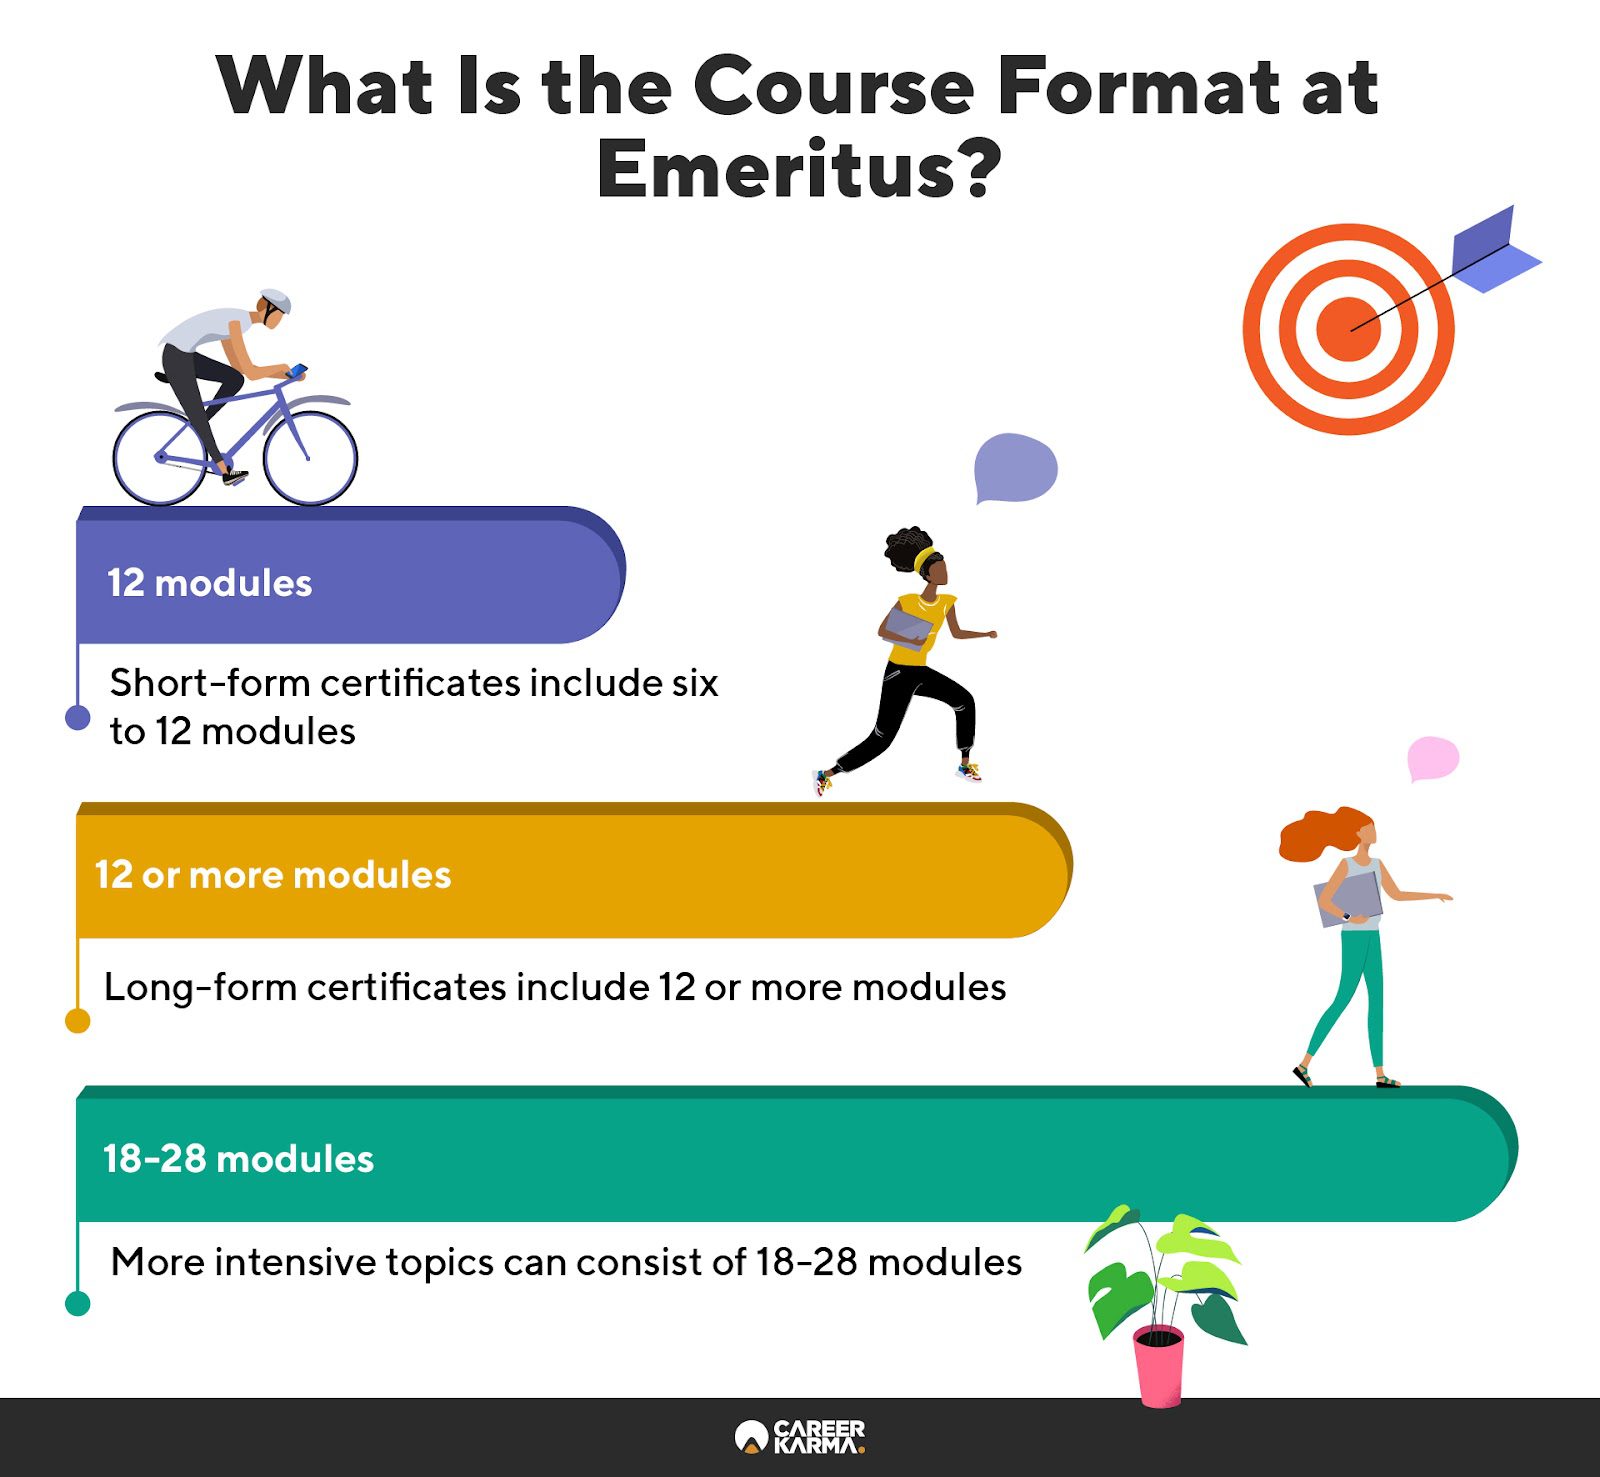 An infographic highlighting the course format at Emeritus